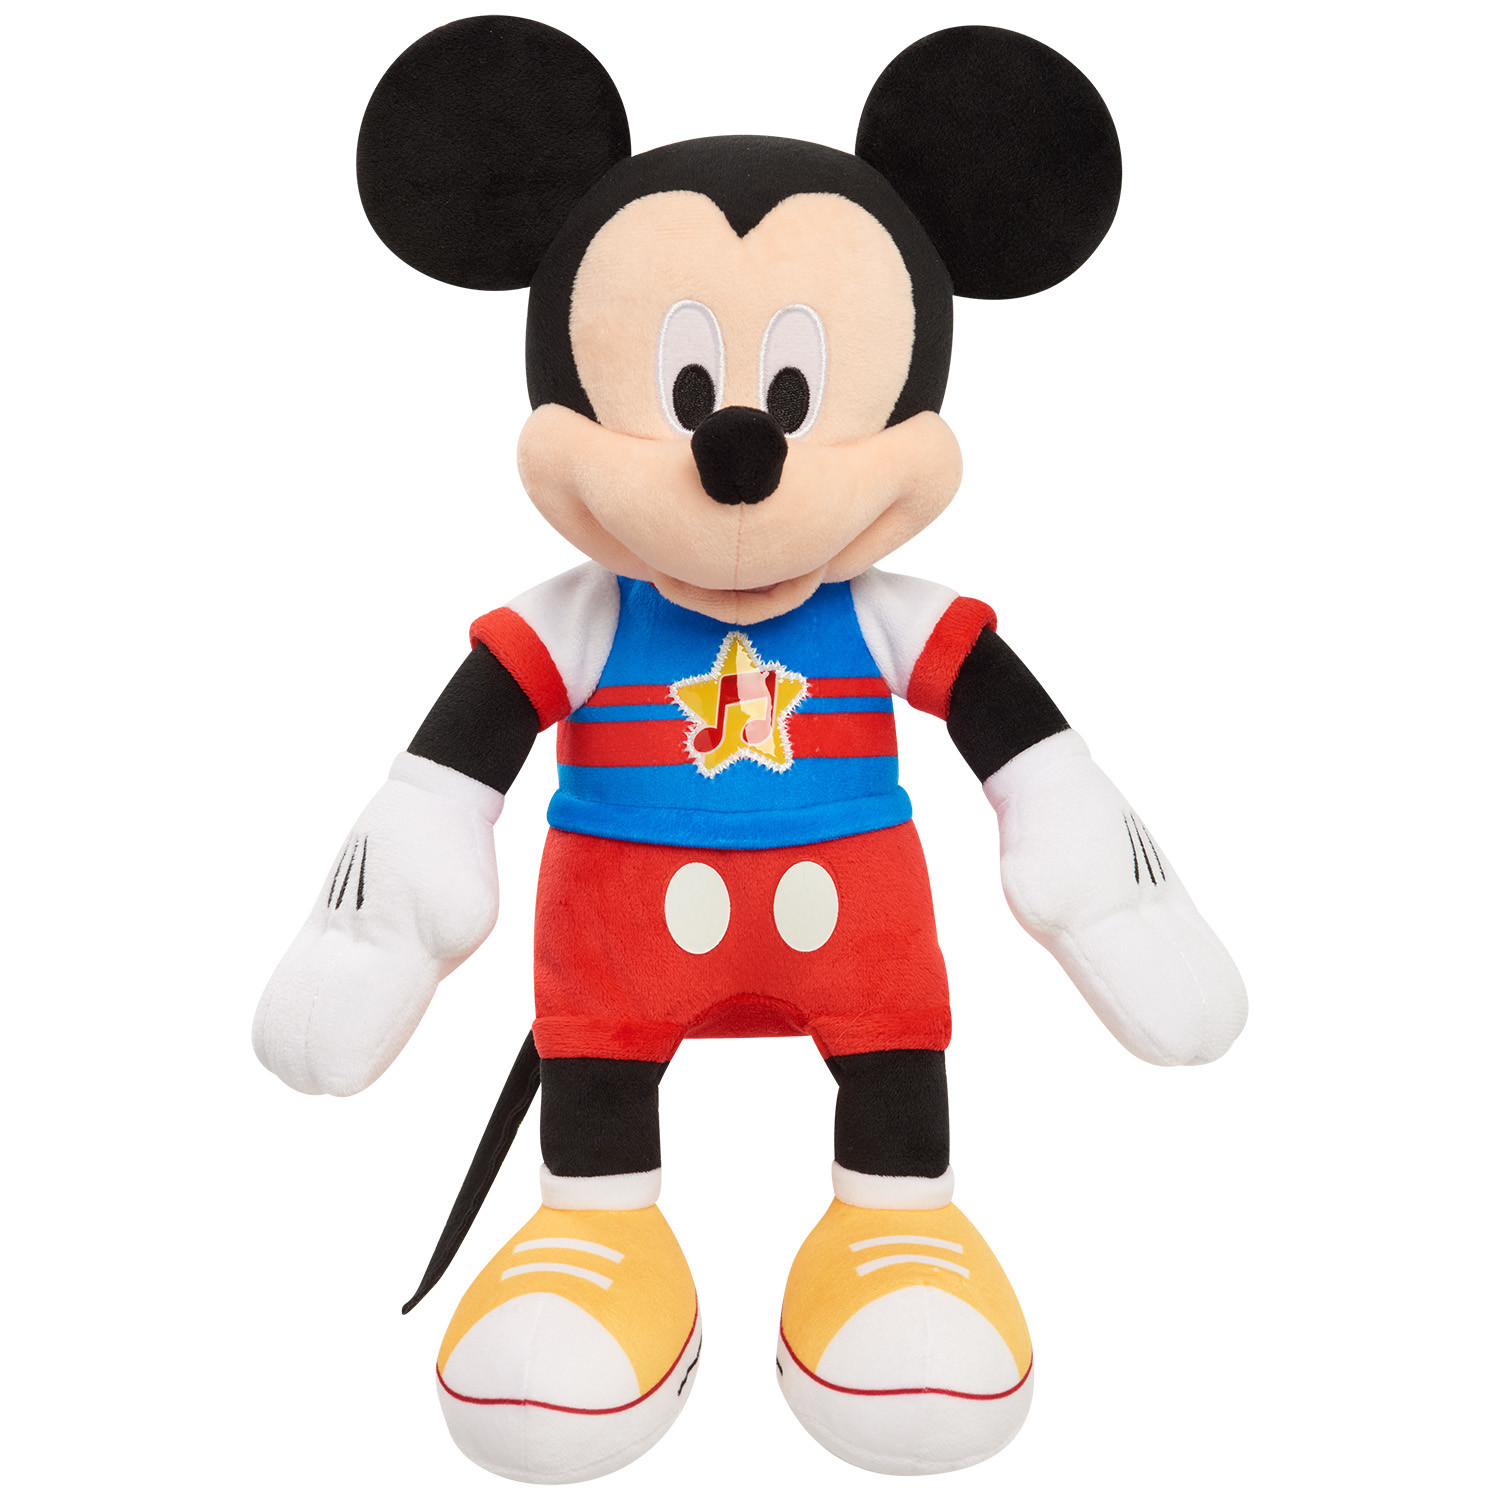 Mickey　Mouse　Feature　Funhouse　Disney　Sounds　Wiggle　Lights　Song,　Toys　Kids　for　Singing　Fun　Junior　Mouse　Inch　Plushie,　The　and　Mickey　Giggle　13　Sings　Ages　up